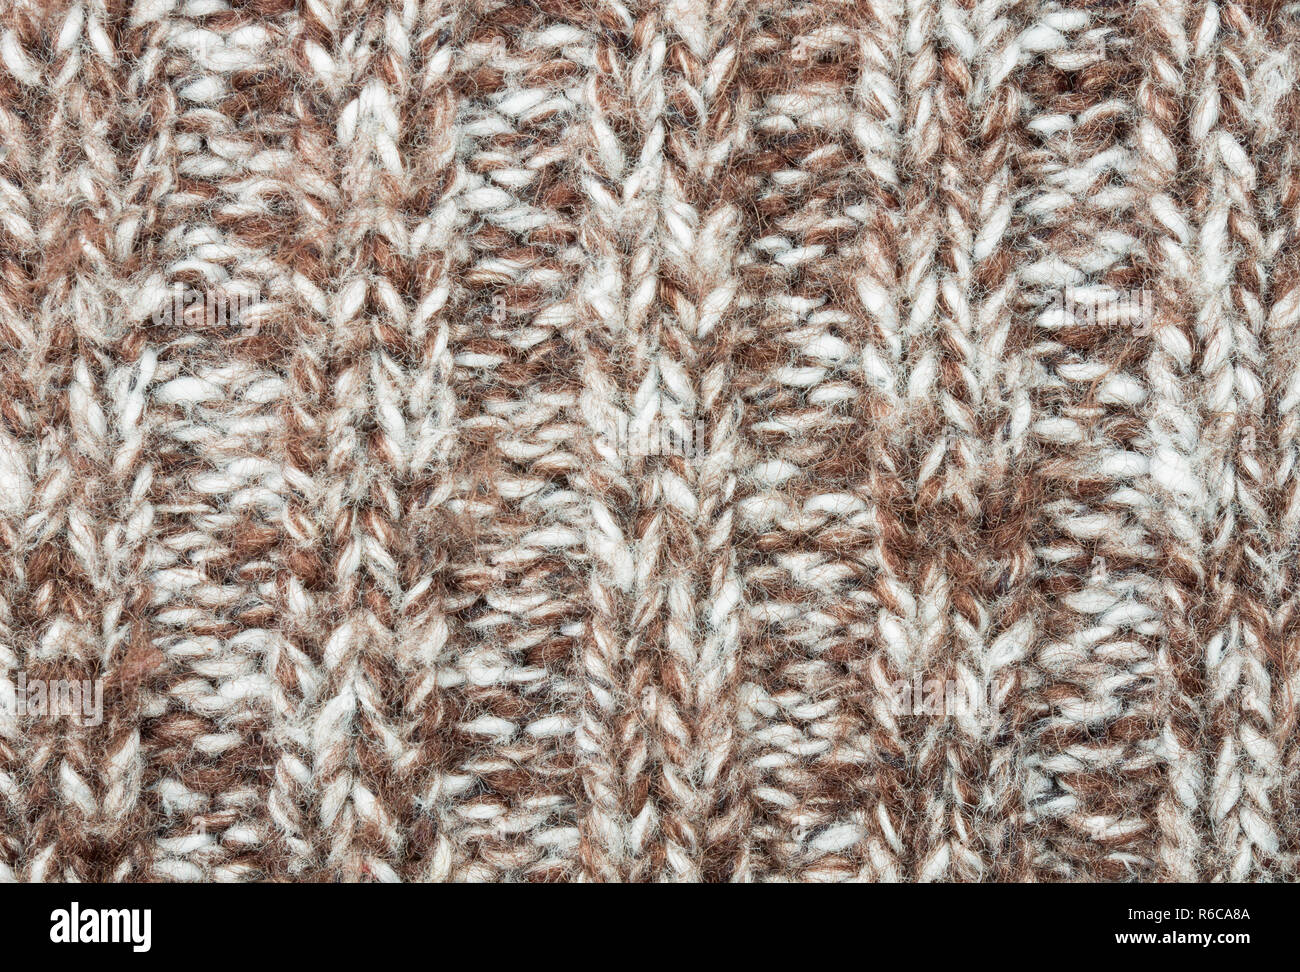 Vertical Brown Knitting or Knitted Fabric Texture Pattern Background Stock Photo